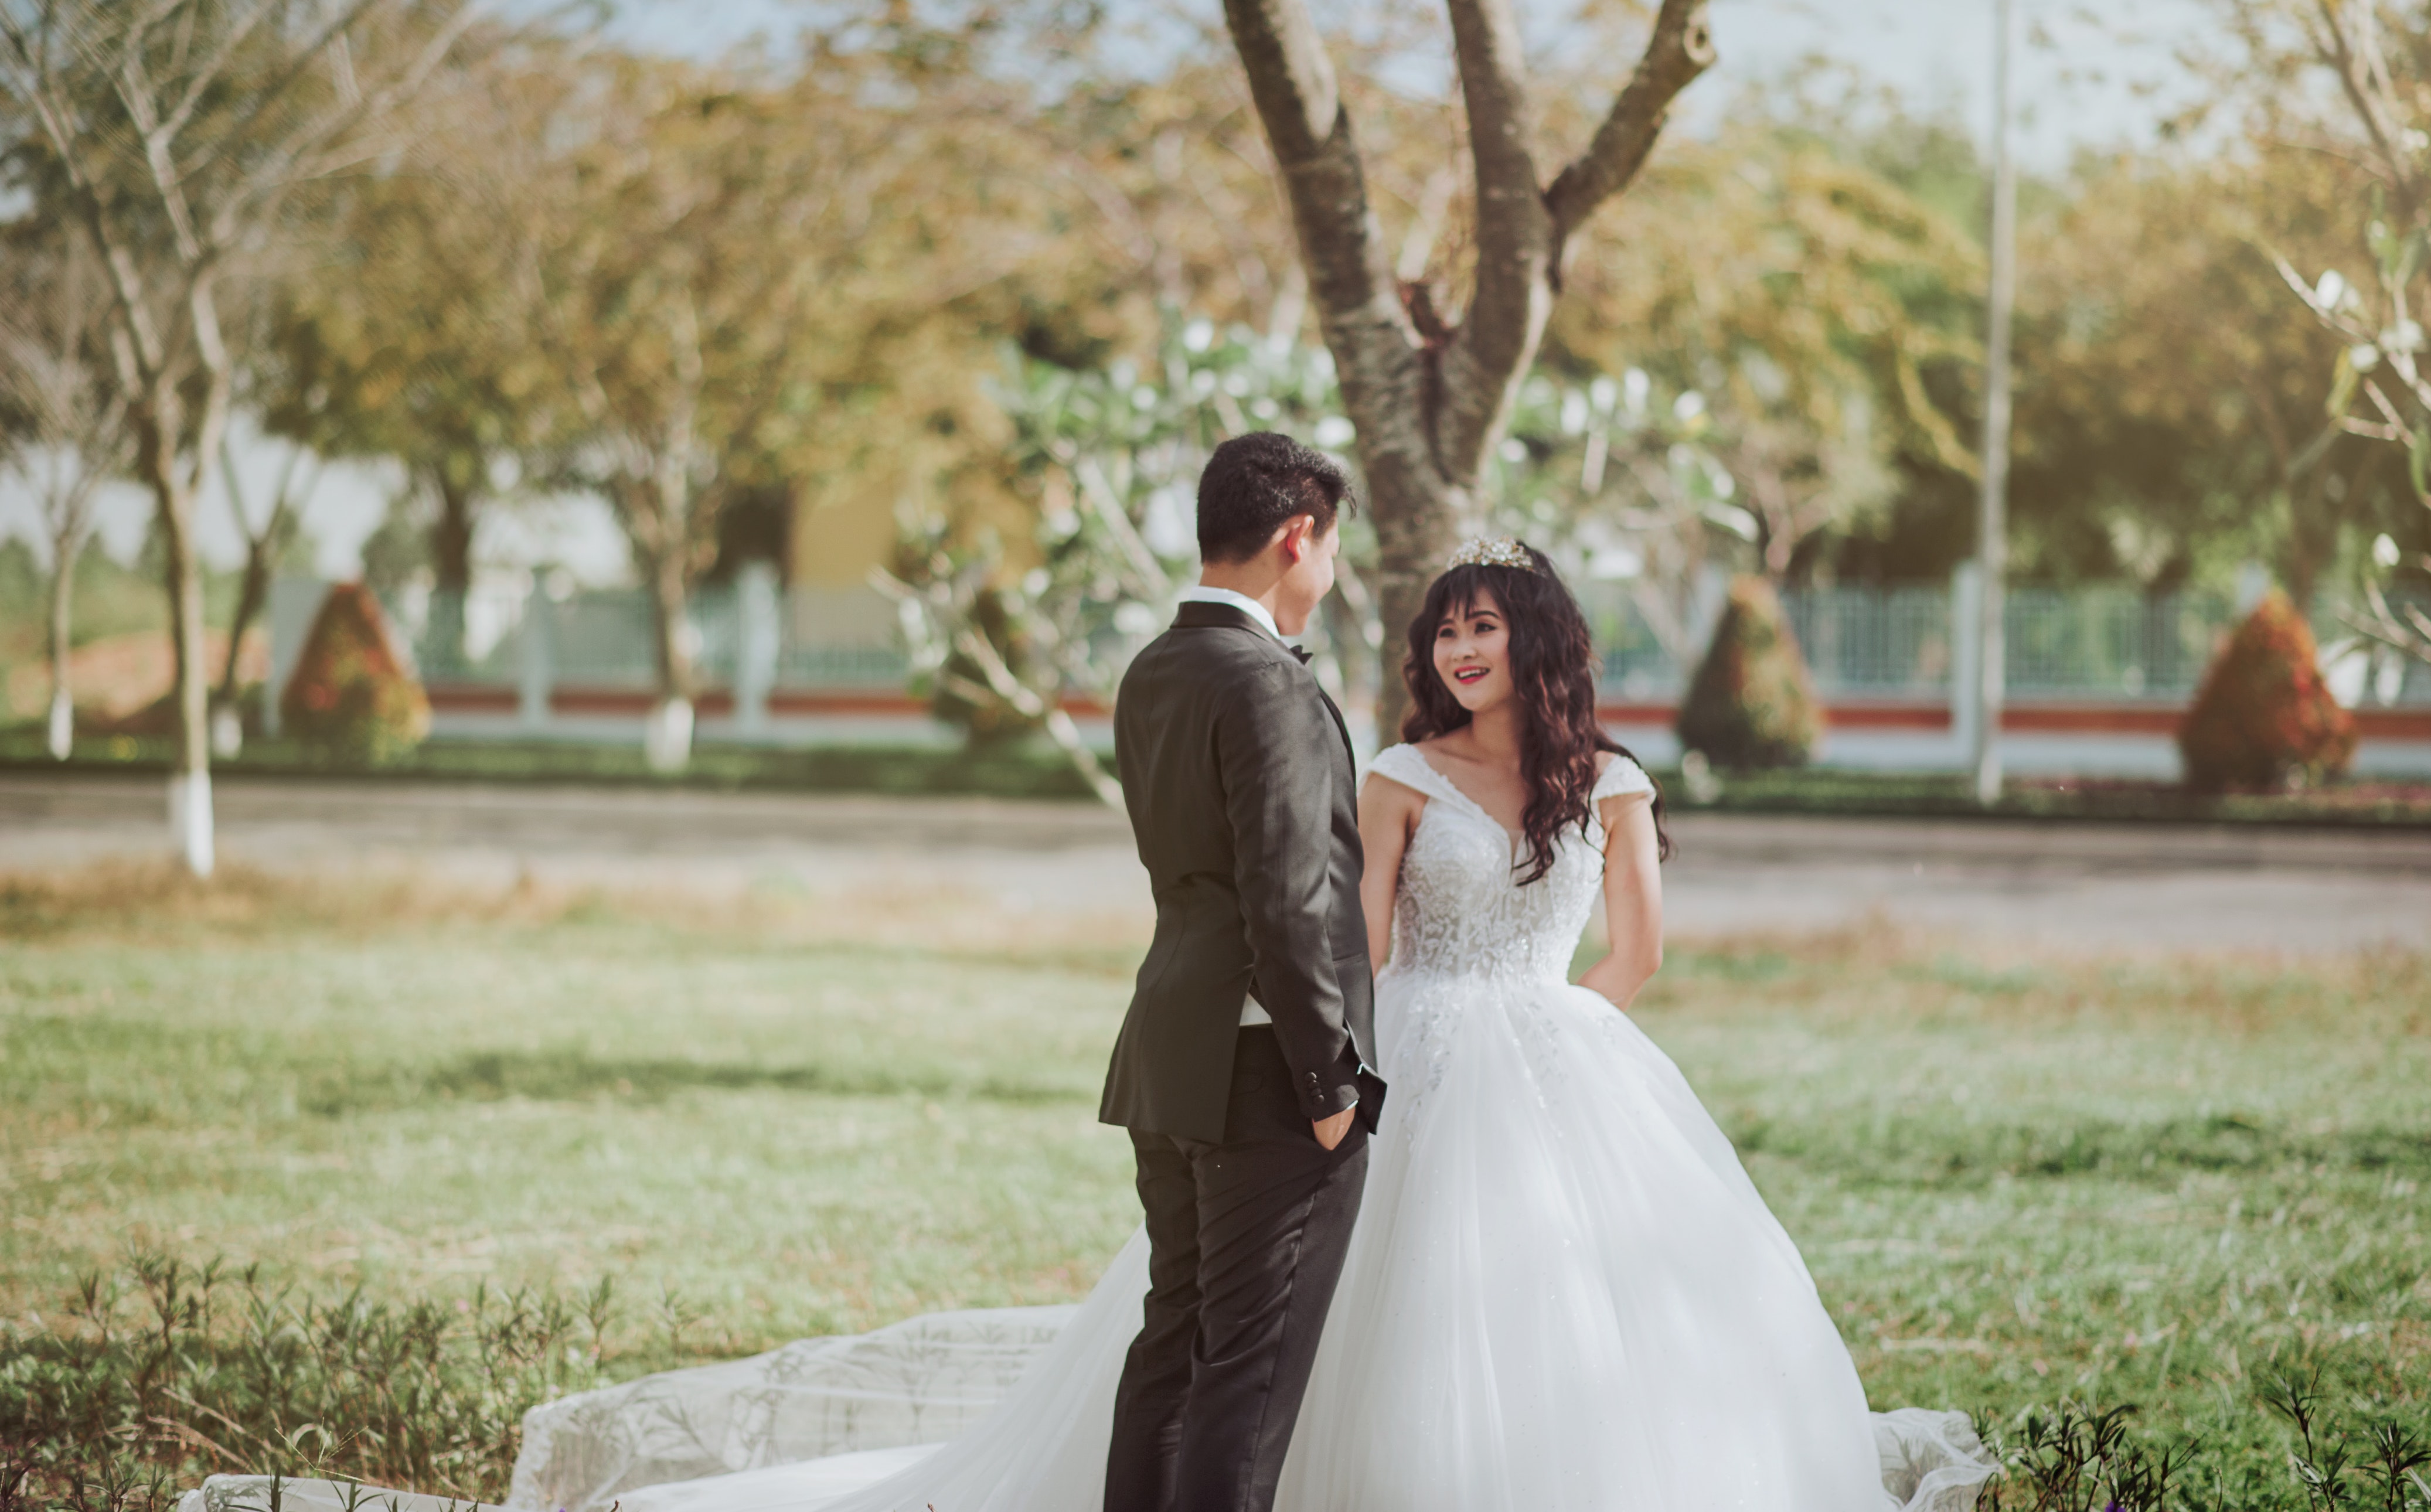 Photo of Bride and Groom Talking, Adult, Smiling, Park, People, HQ Photo